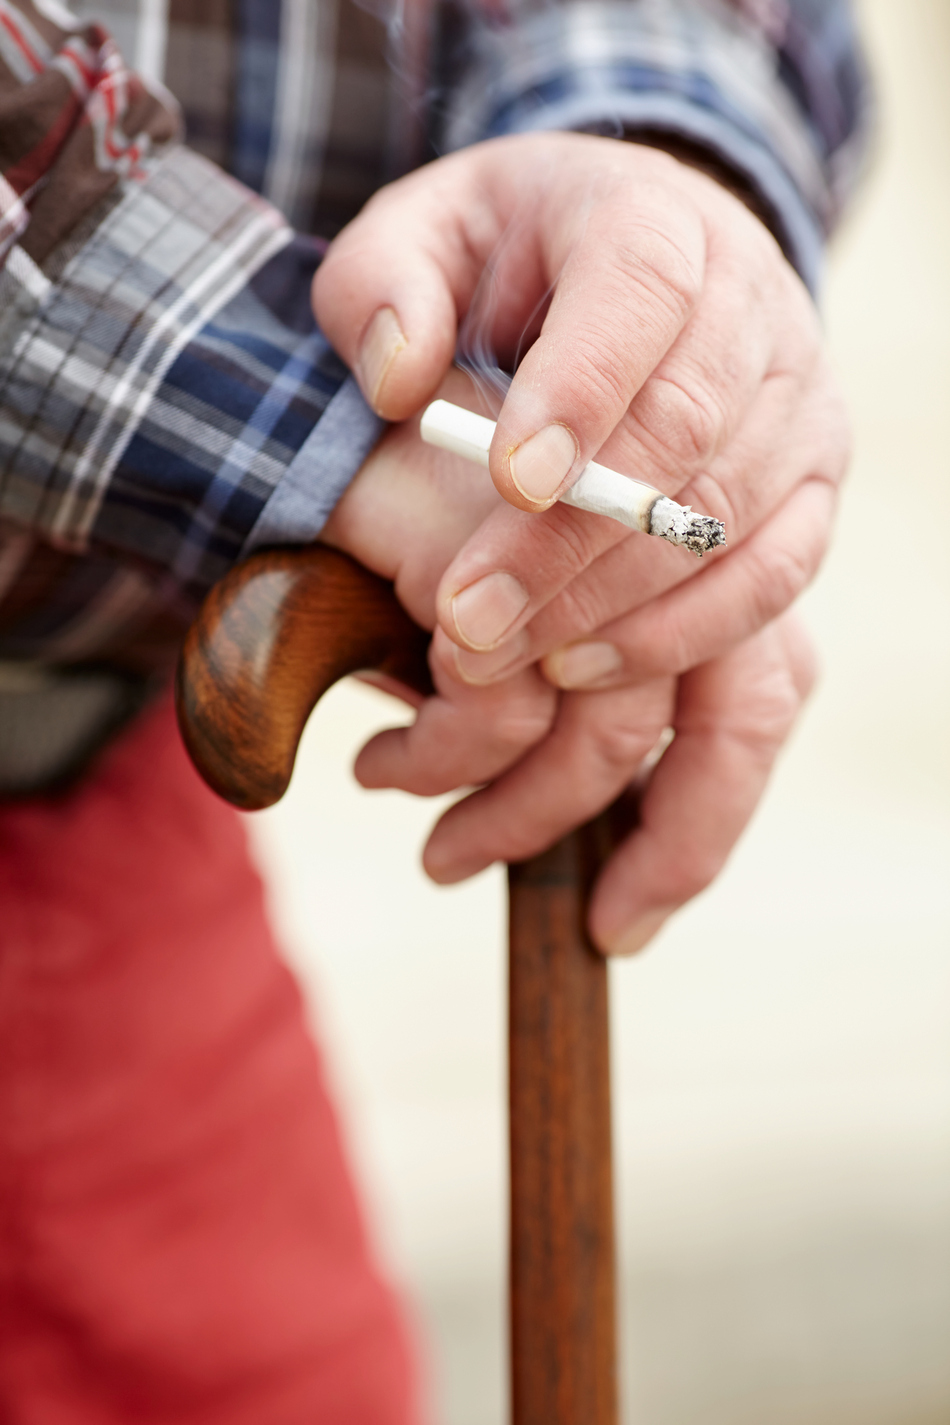 Will You Actually Live Longer if You Quit Smoking?